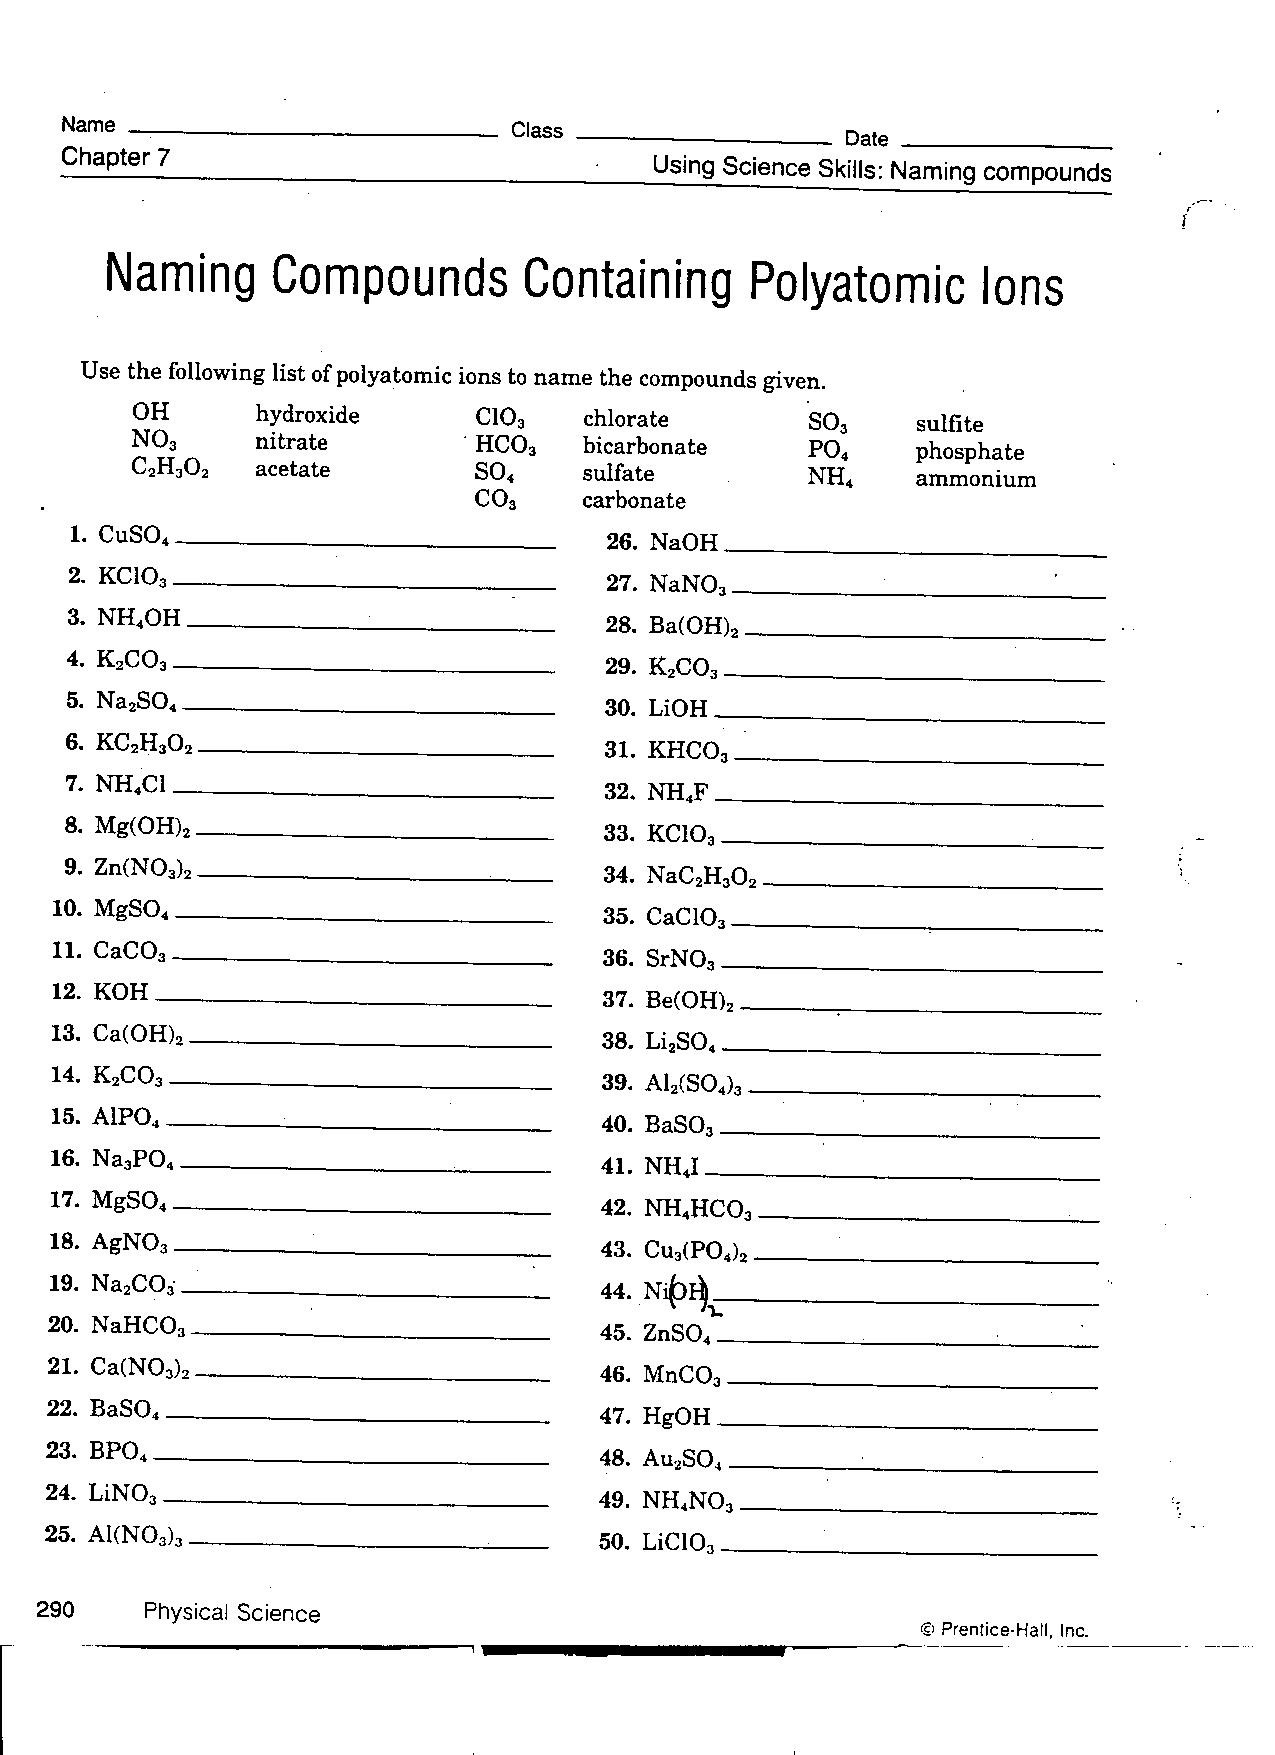 Polyatomic Ions Worksheet Answers 35 Ions Worksheet Chemistry Answers Worksheet Resource Plans